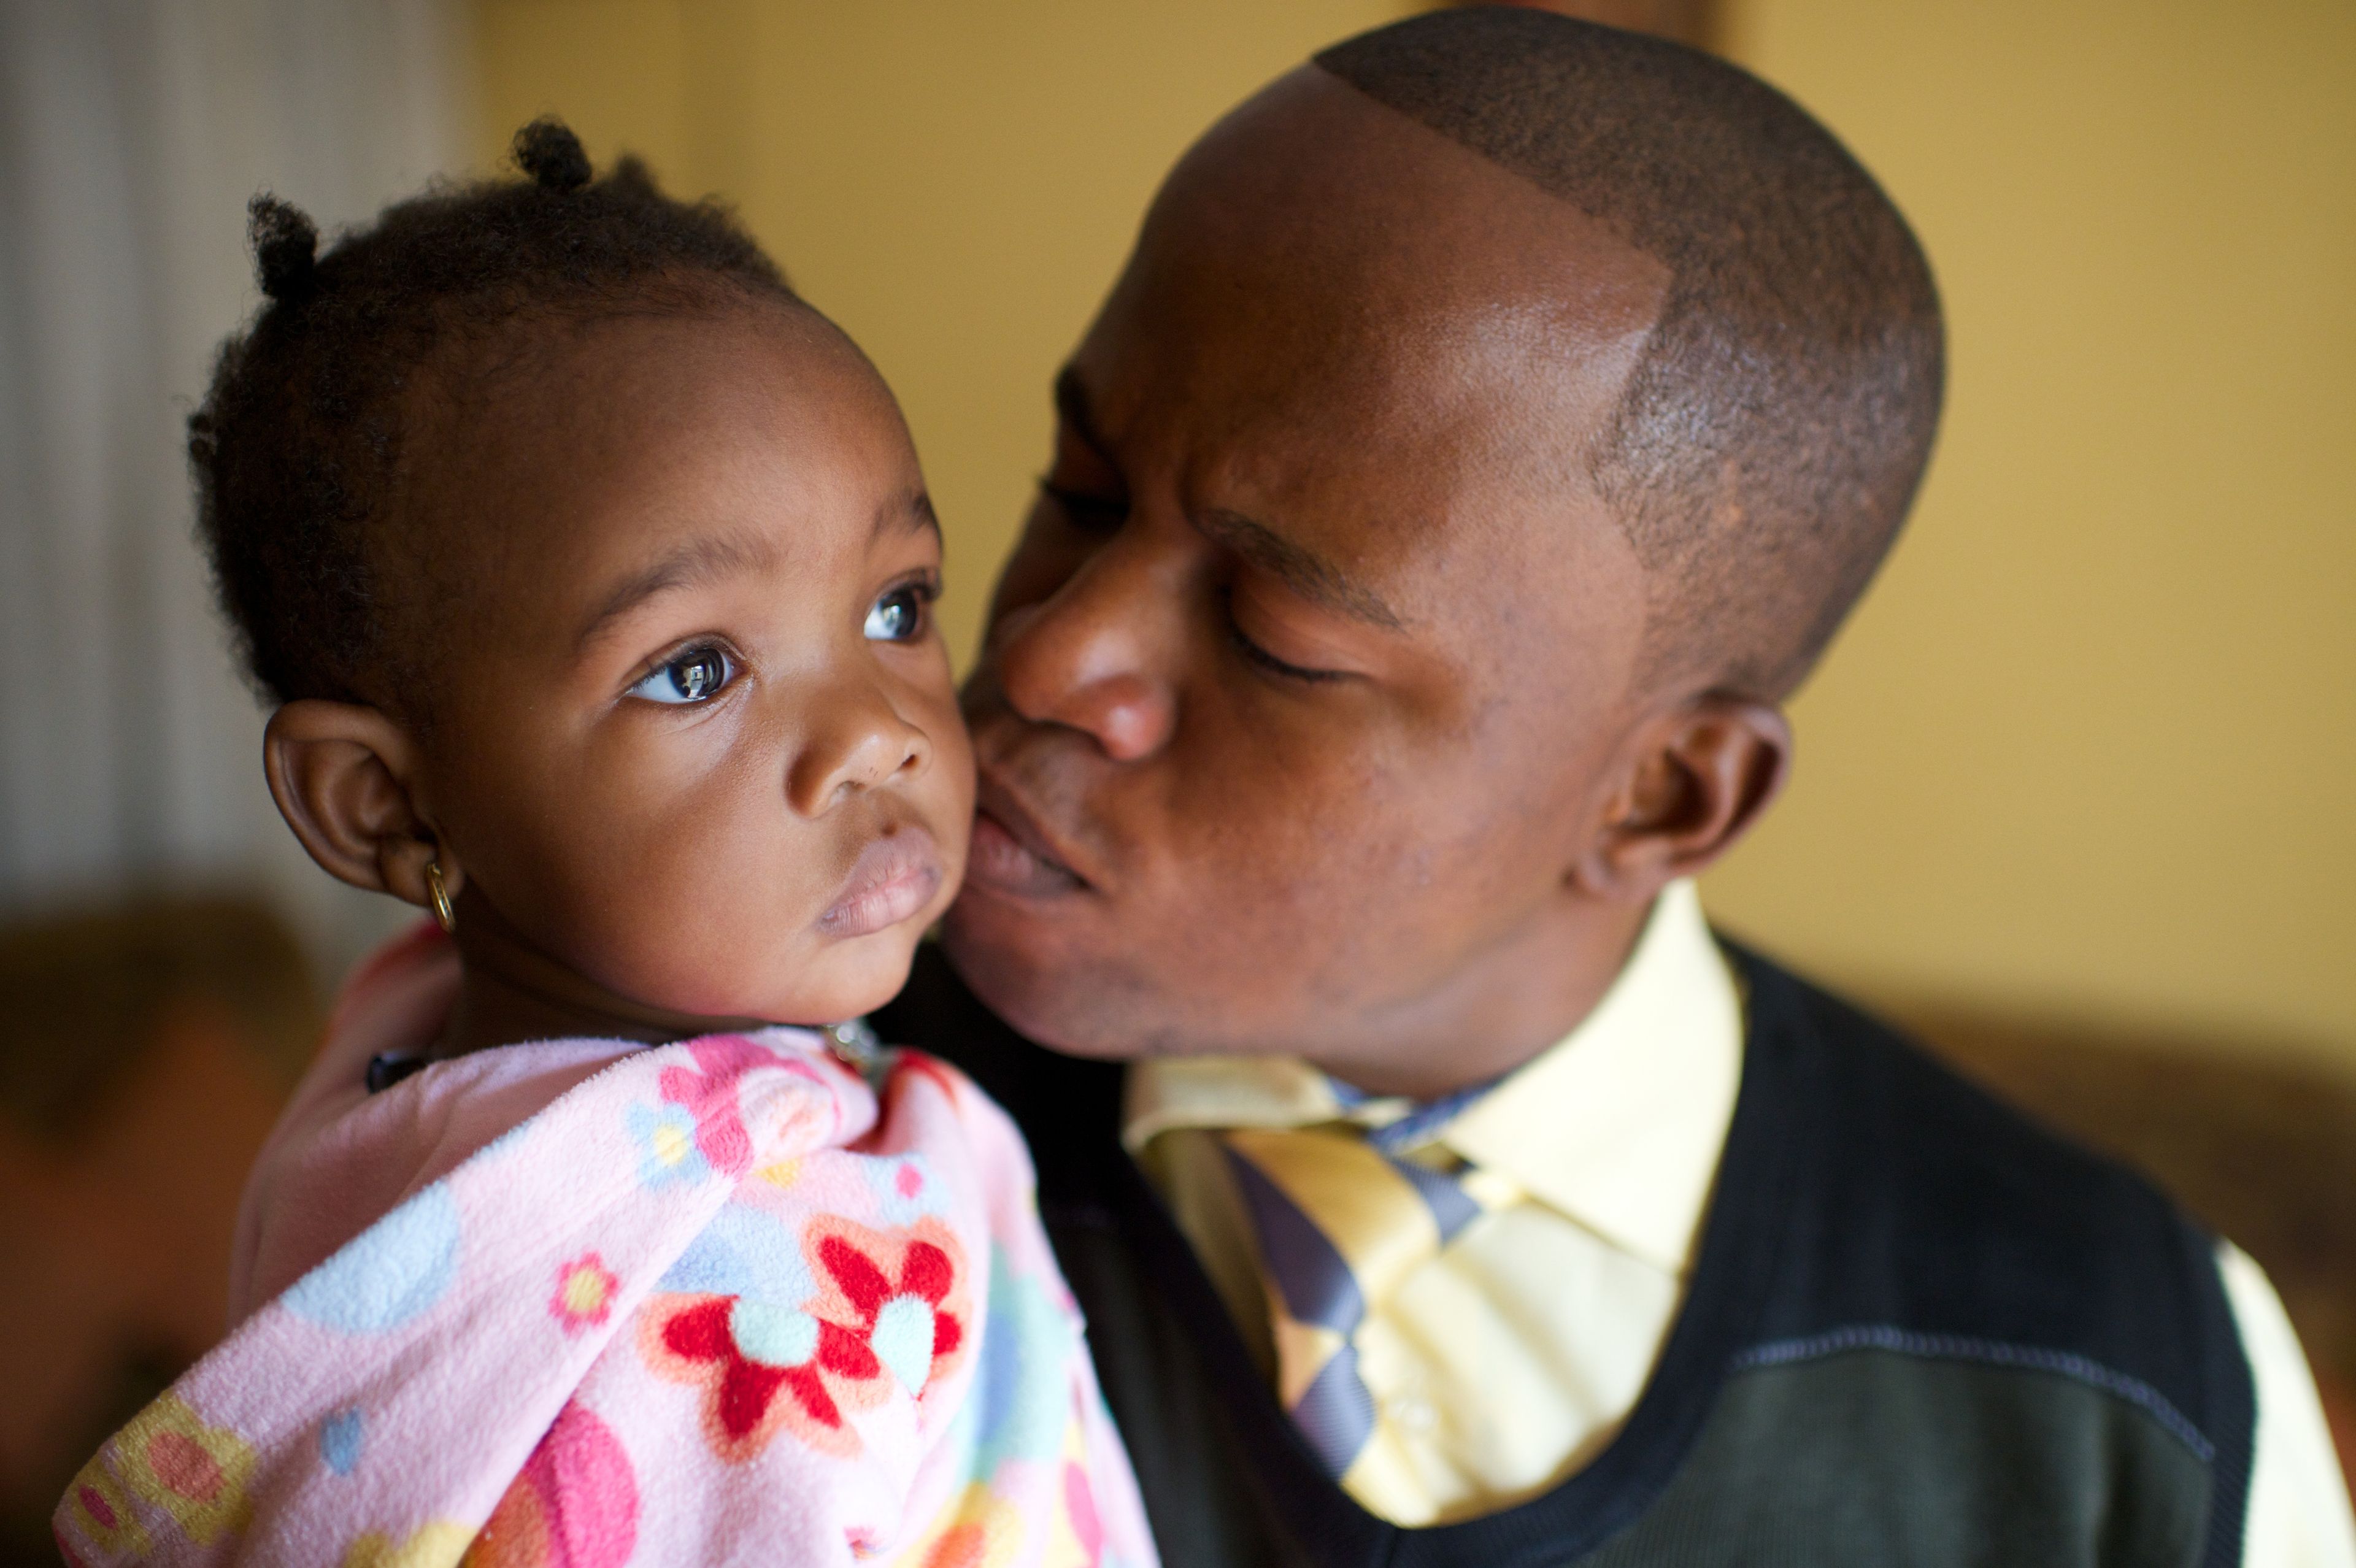 A father pauses to kiss his baby daughter’s cheek.